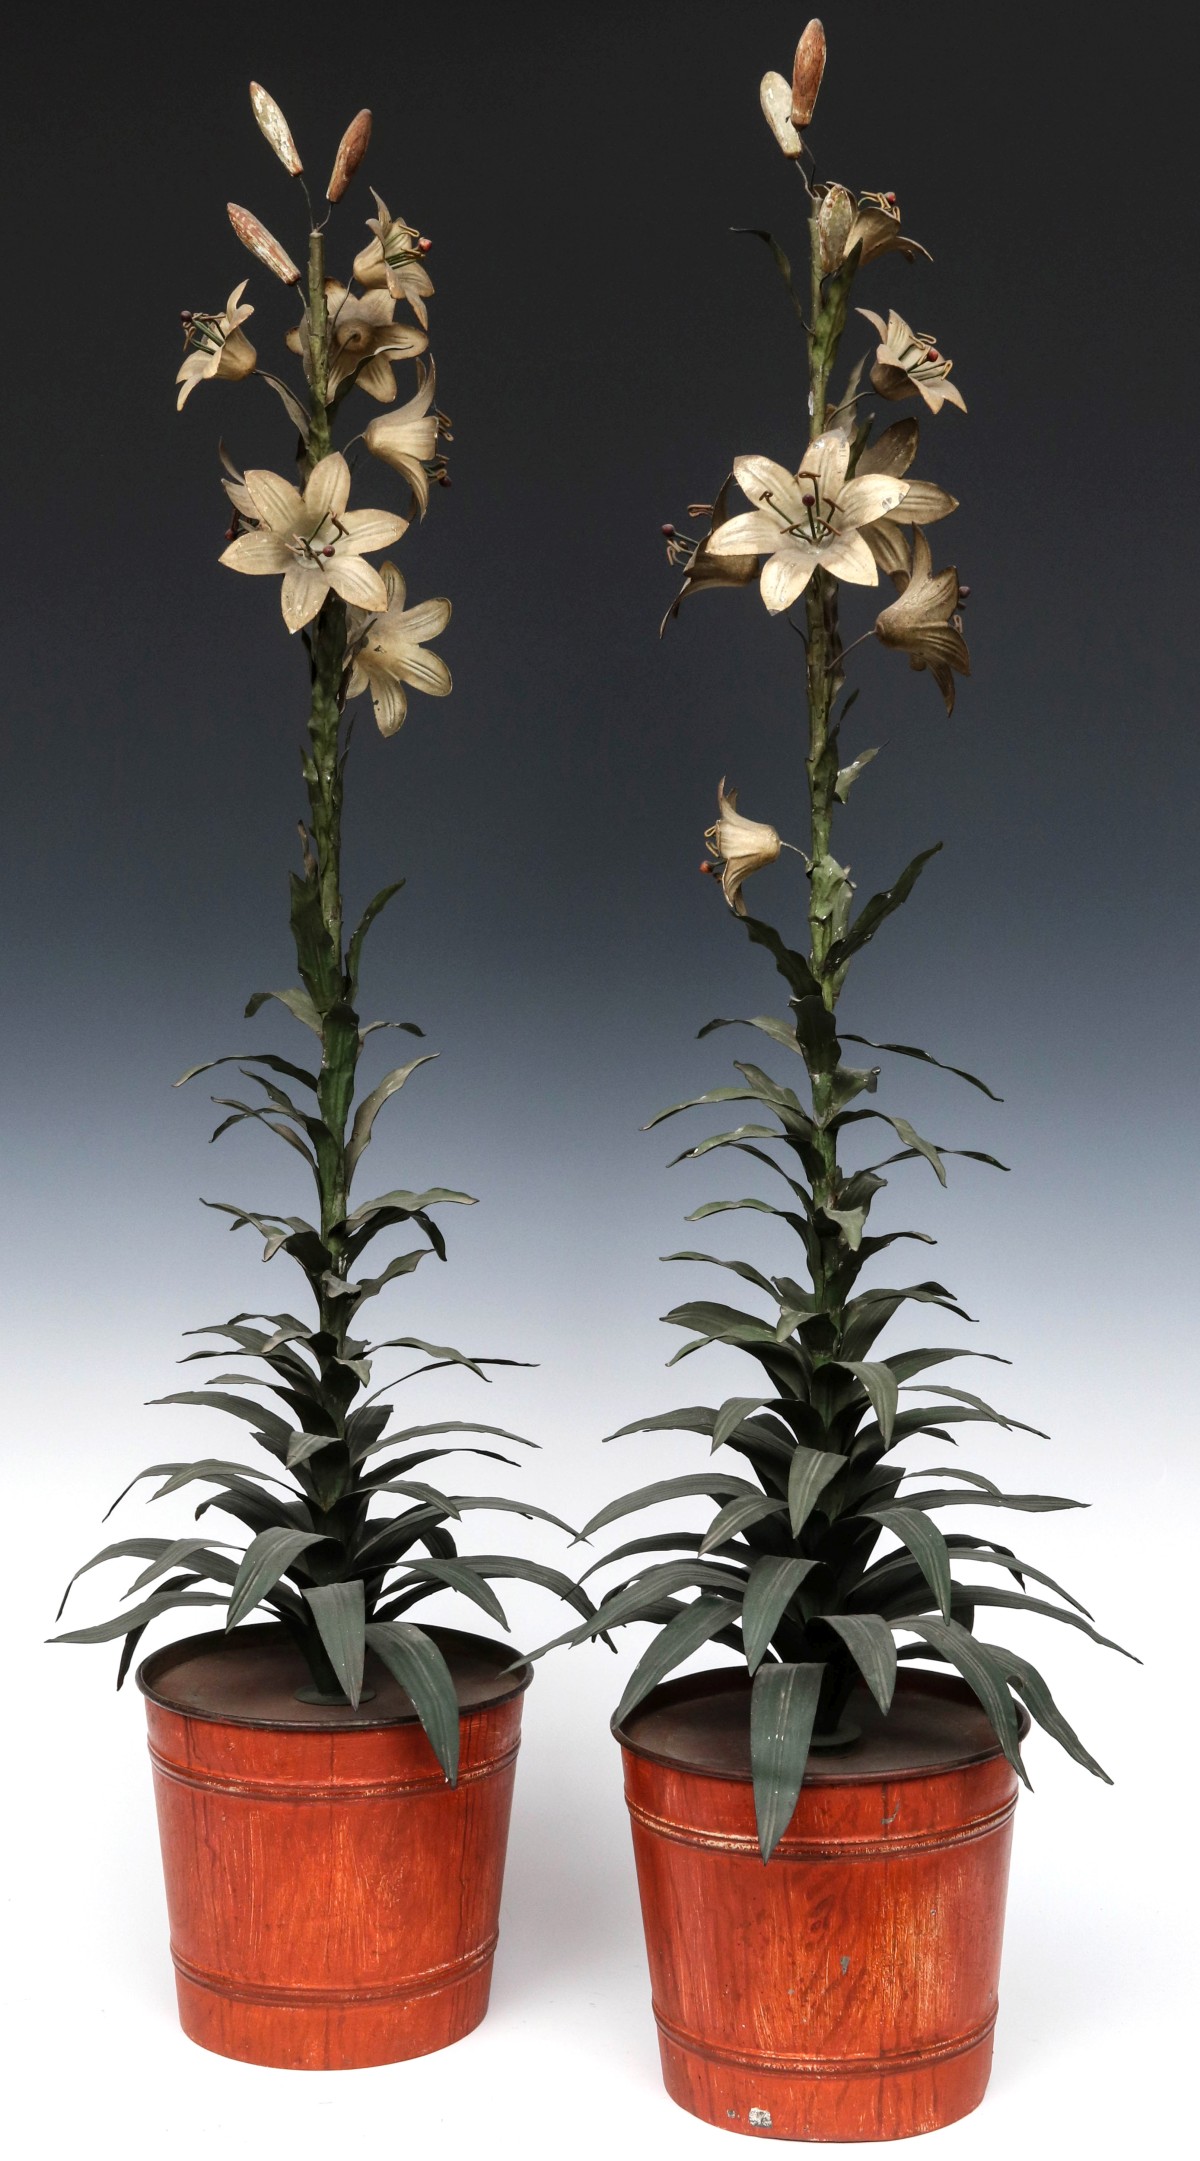 AN OUTSTANDING PAIR OF 19TH CENTURY FRENCH TOLE LILIES